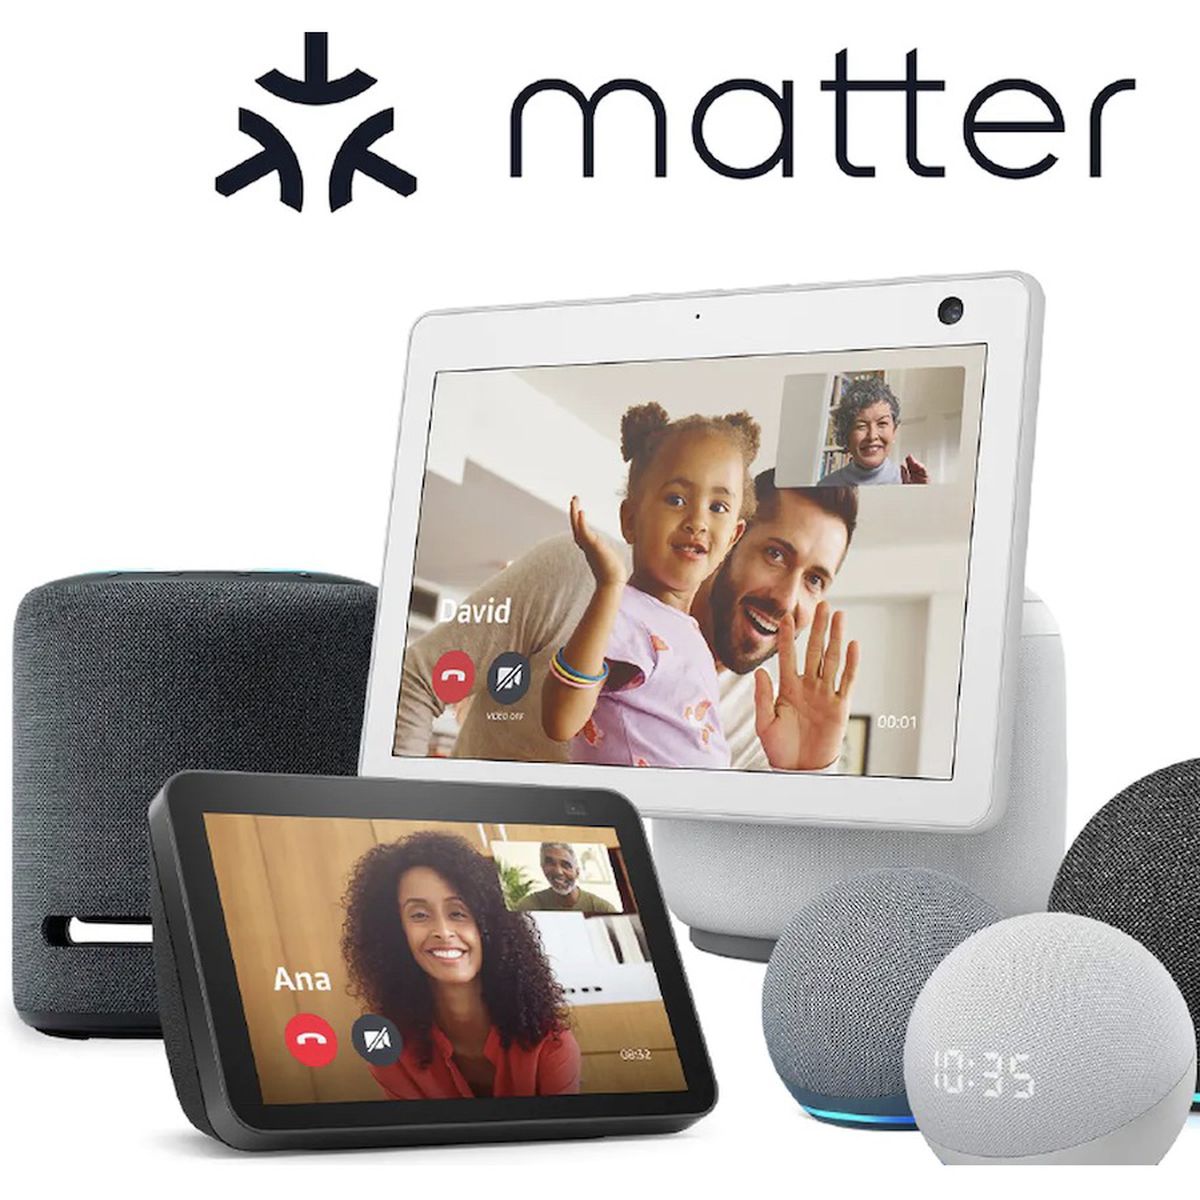 Echo devices to get 'Matter' support in December